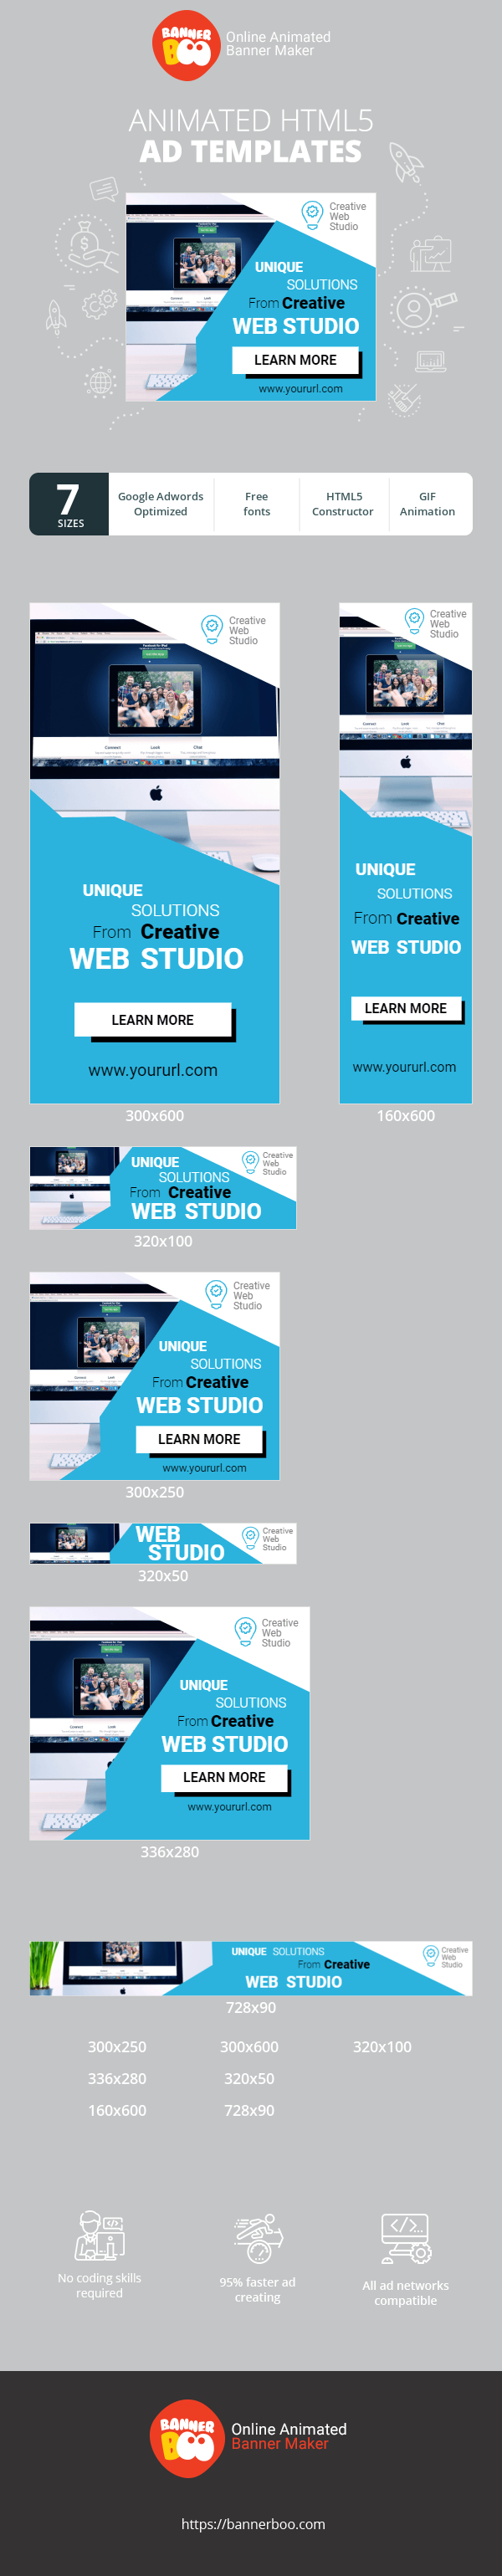 Banner ad template — Unique Solutions From Creative Web Studio